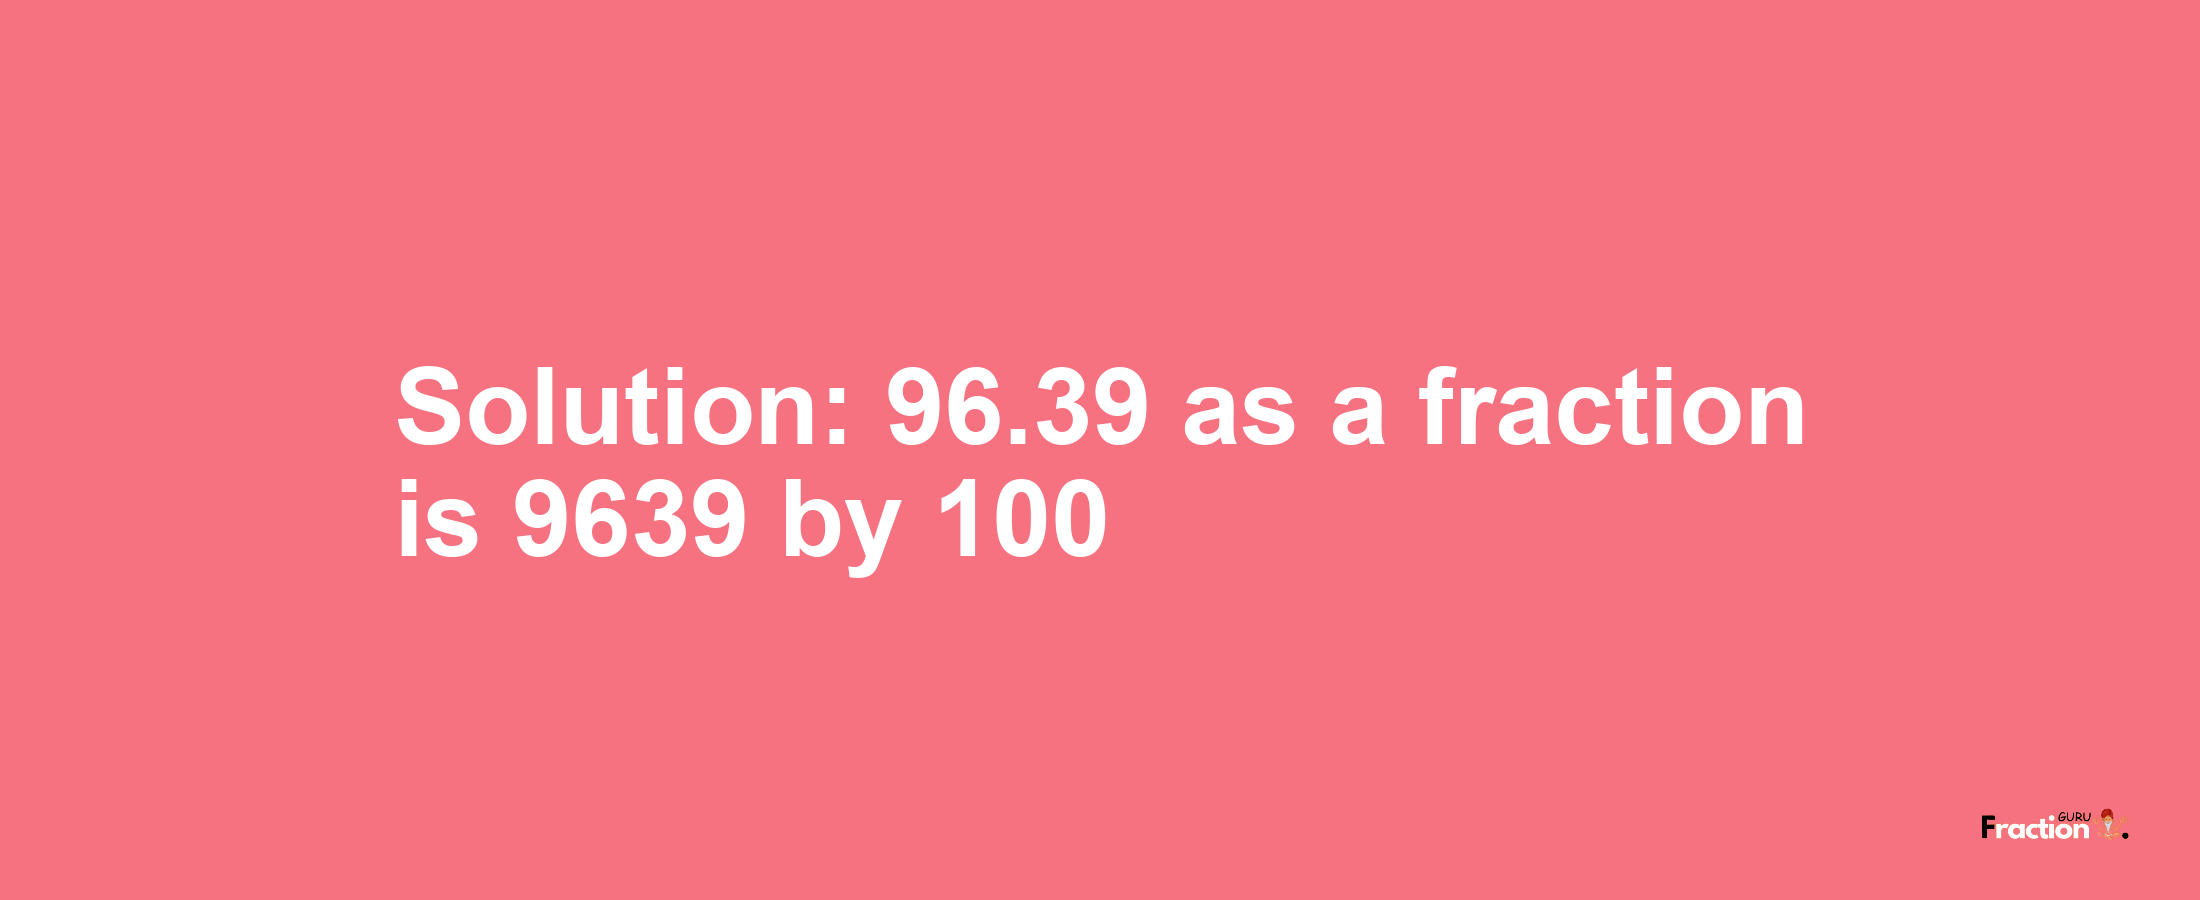 Solution:96.39 as a fraction is 9639/100